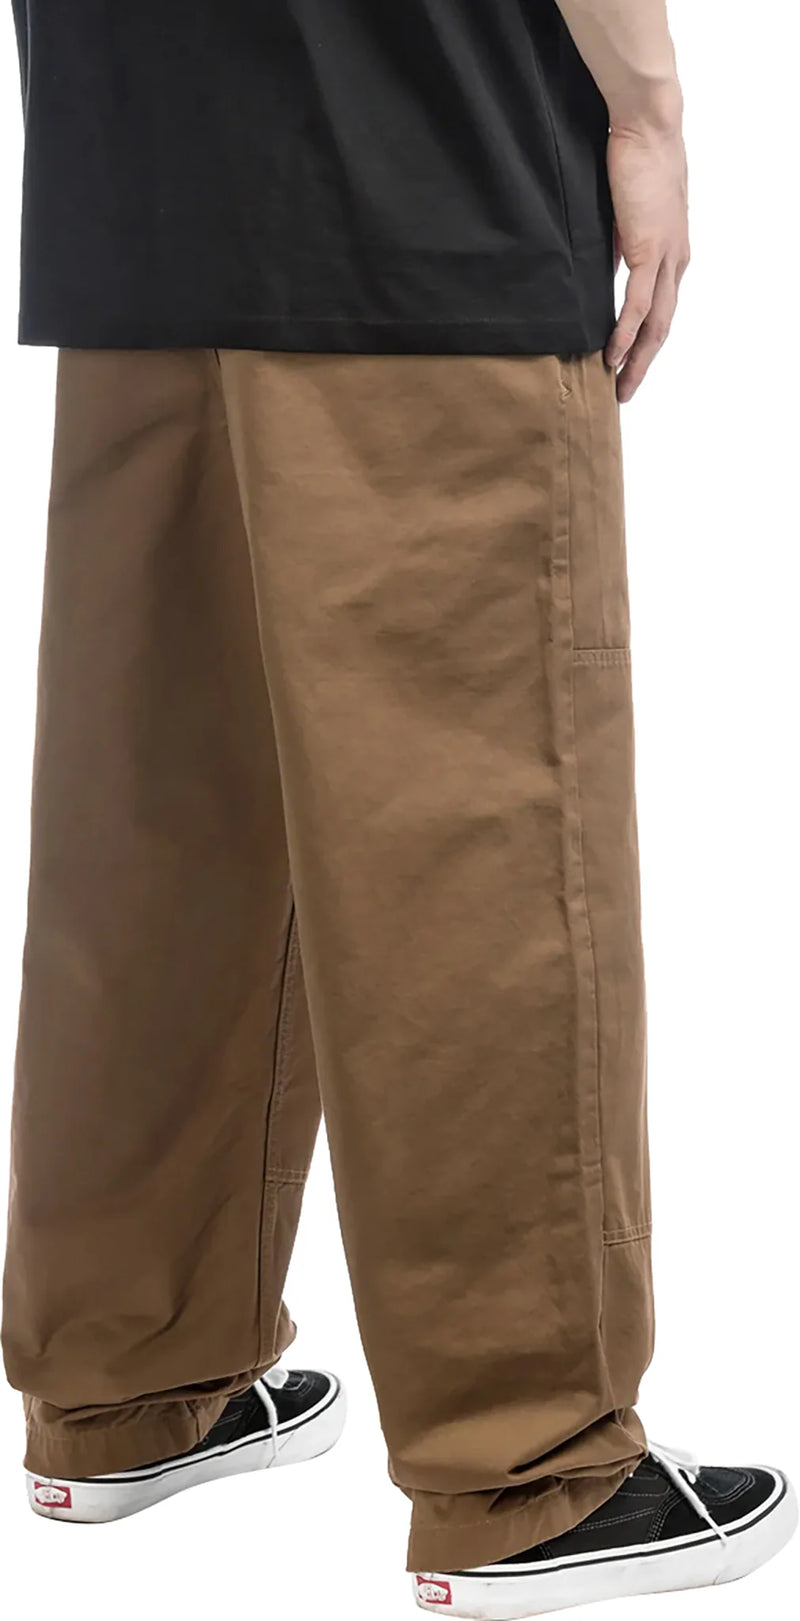 Vans Authentic Chino Pants Loose Sepia on model